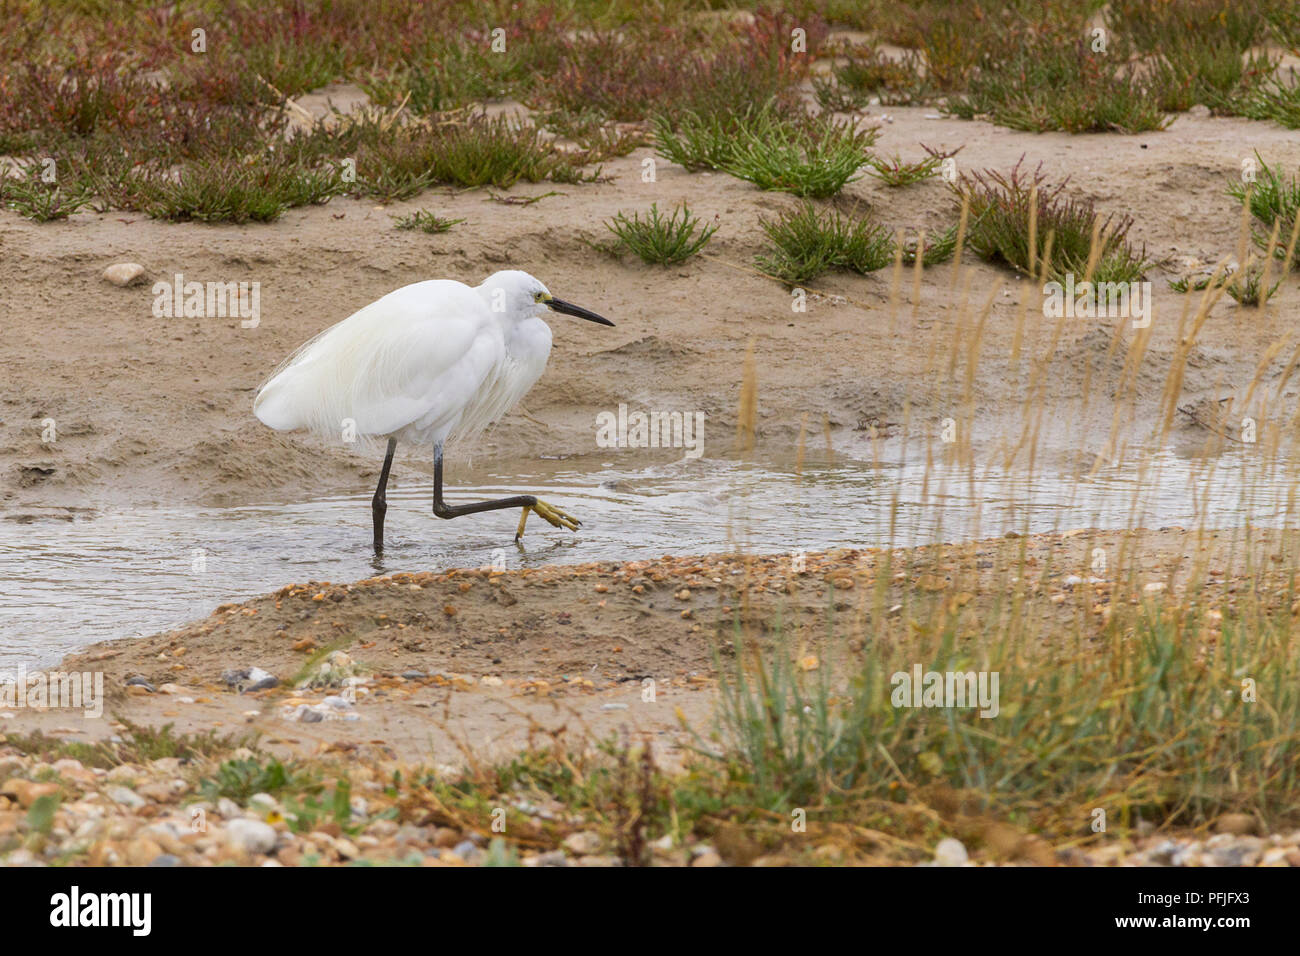 Little egret (Egretta garzetta) pure white black billed wader now common in UK. Europes most widespread white heron with black legs and yellow feet. Stock Photo